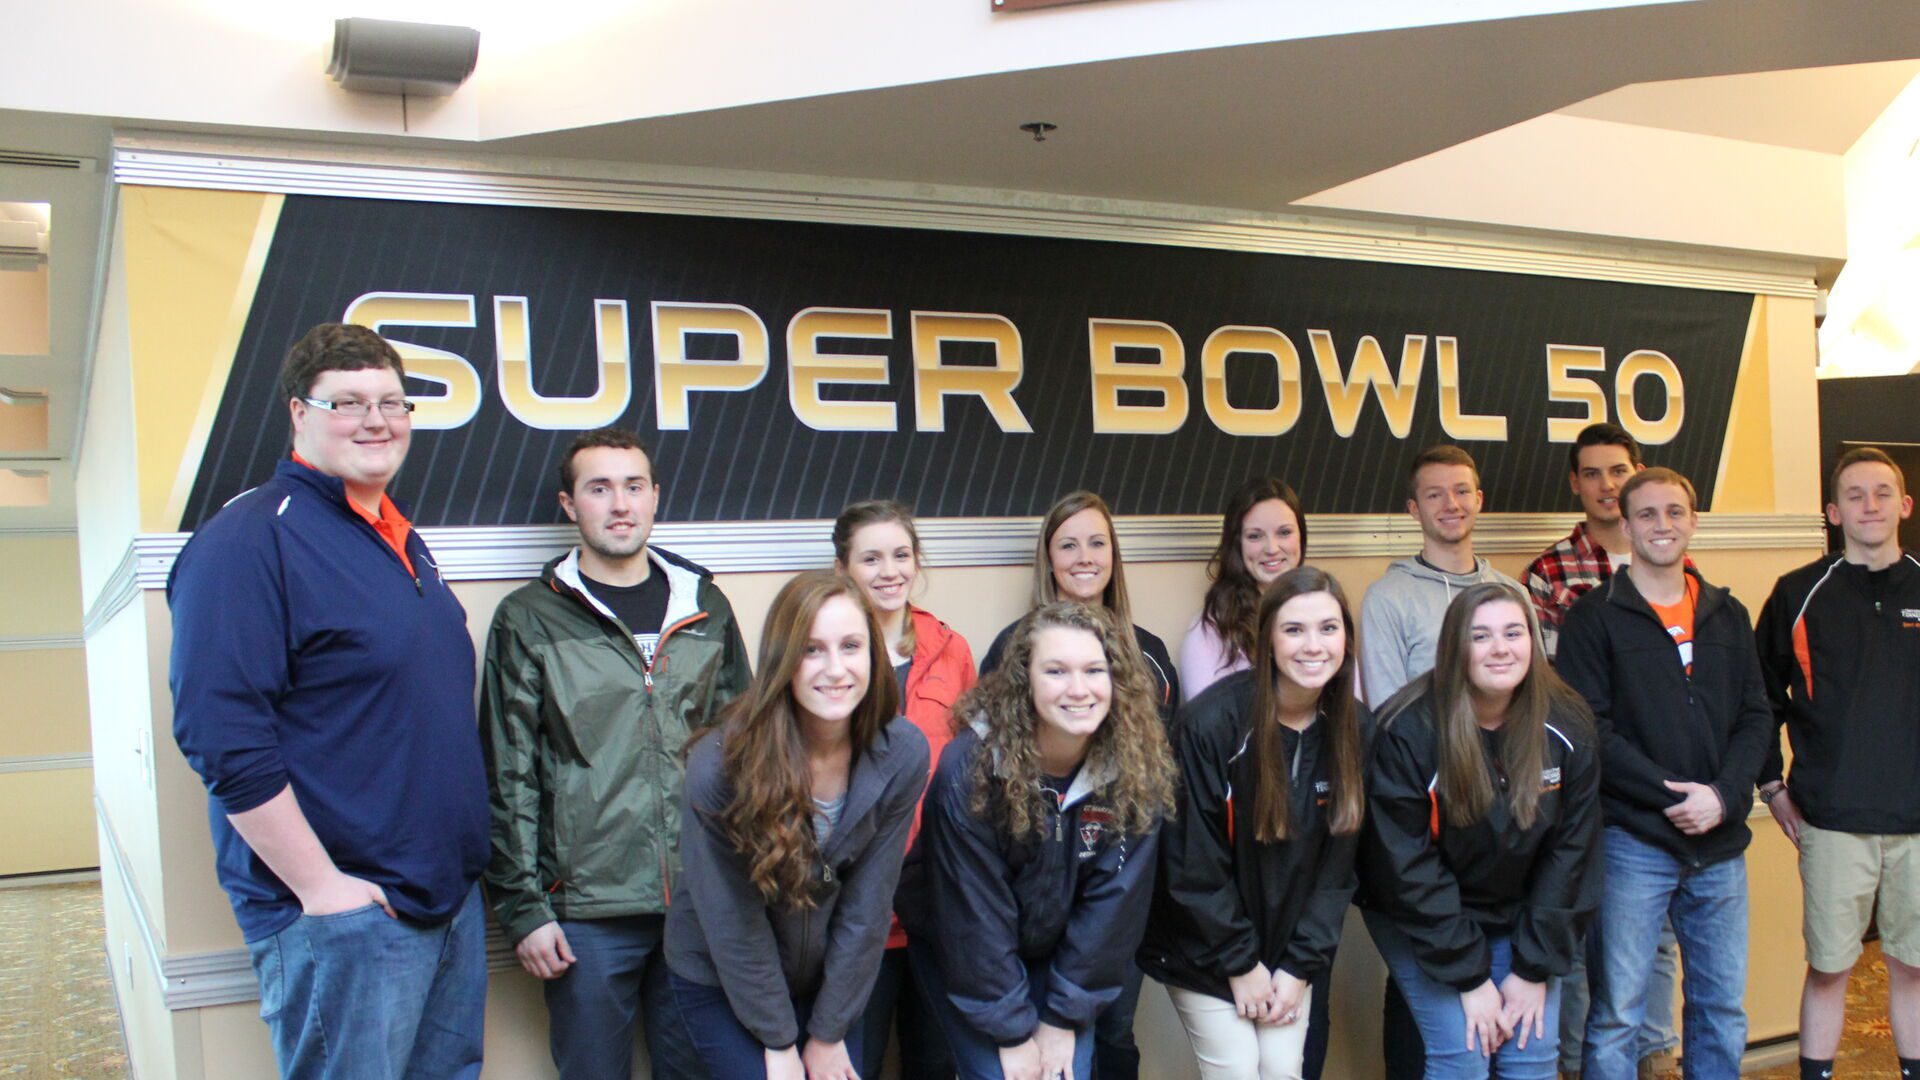 Data science students posed in front of the Super Bowl 50 sign.